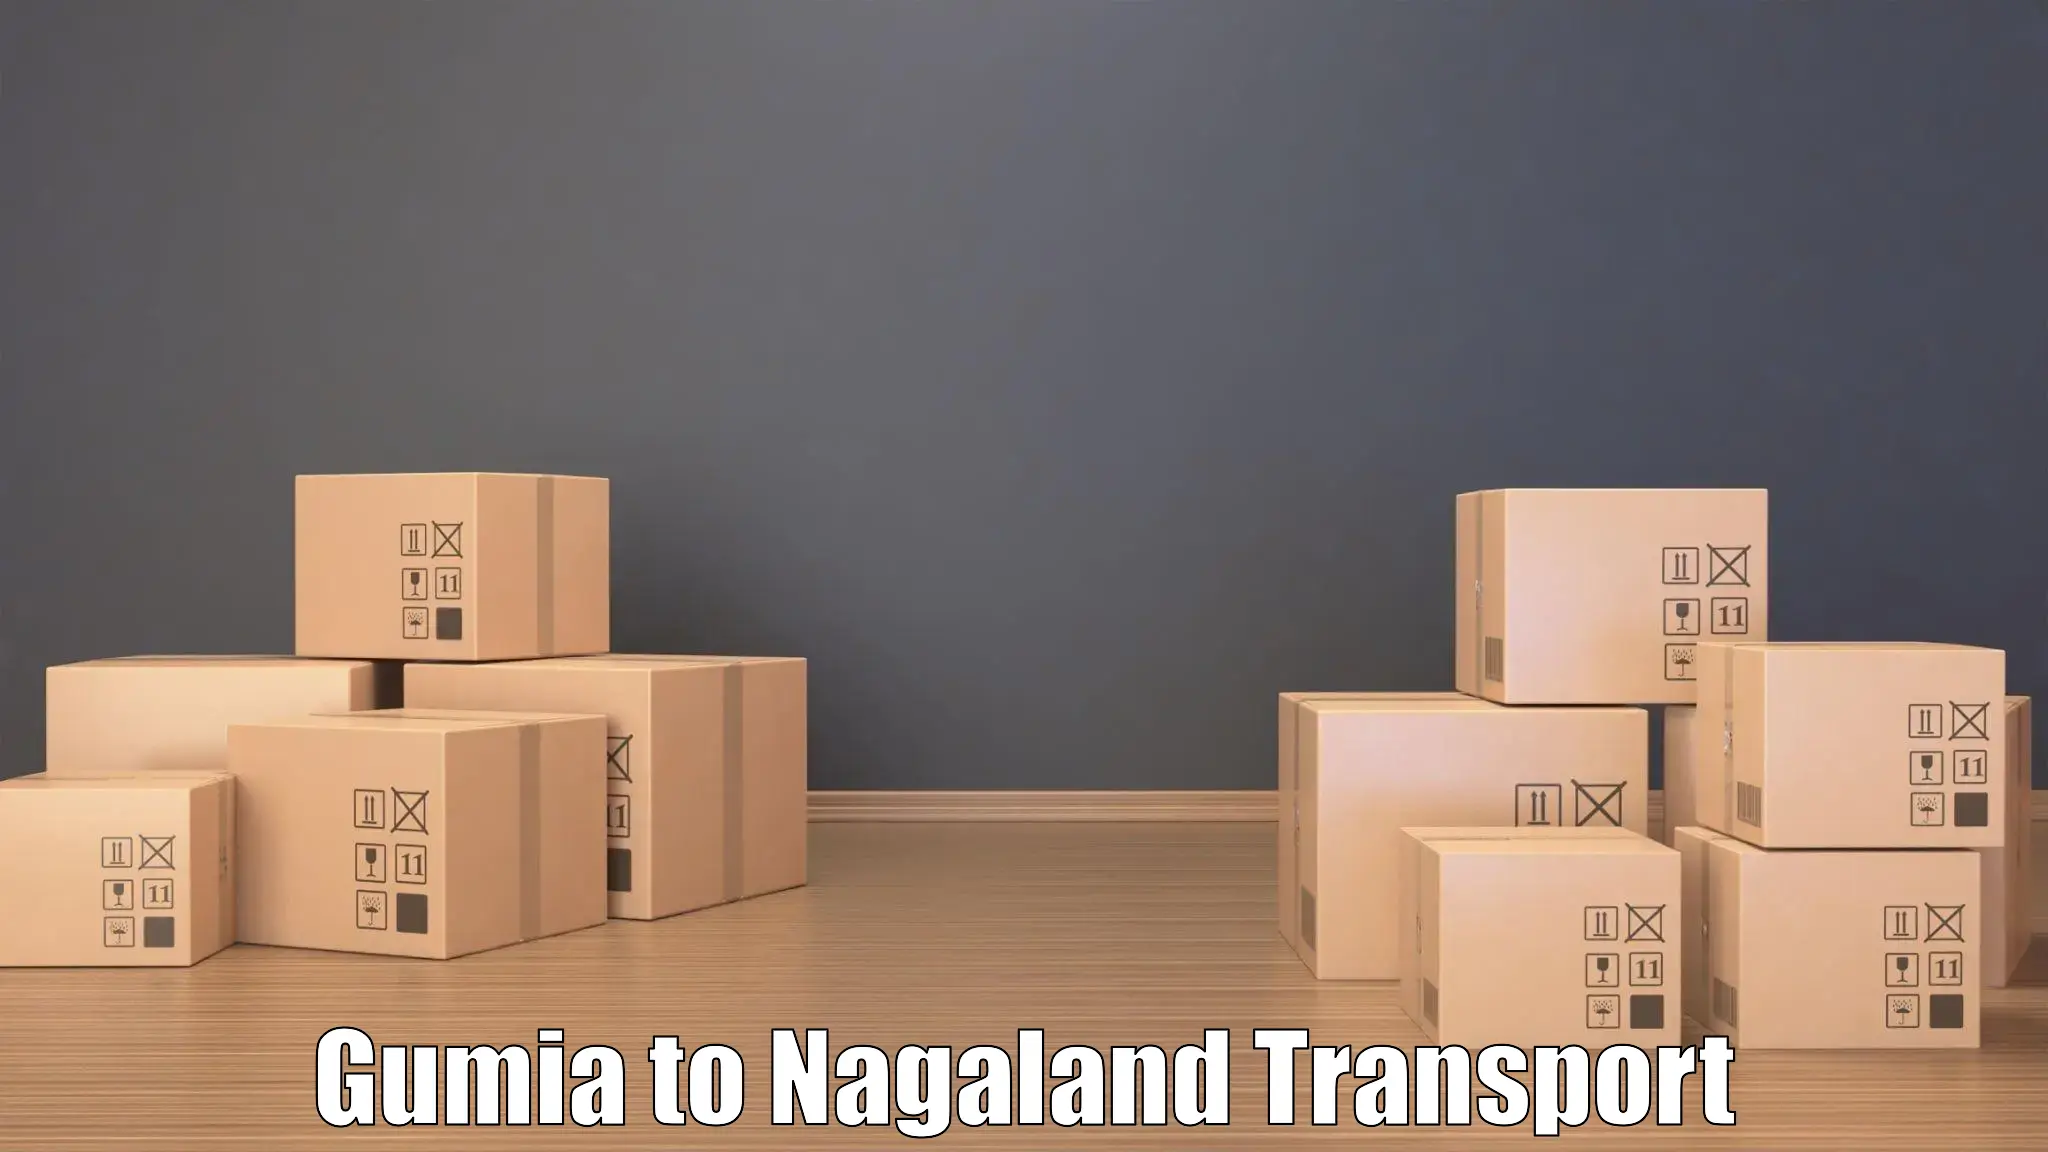 Transport in sharing in Gumia to Nagaland